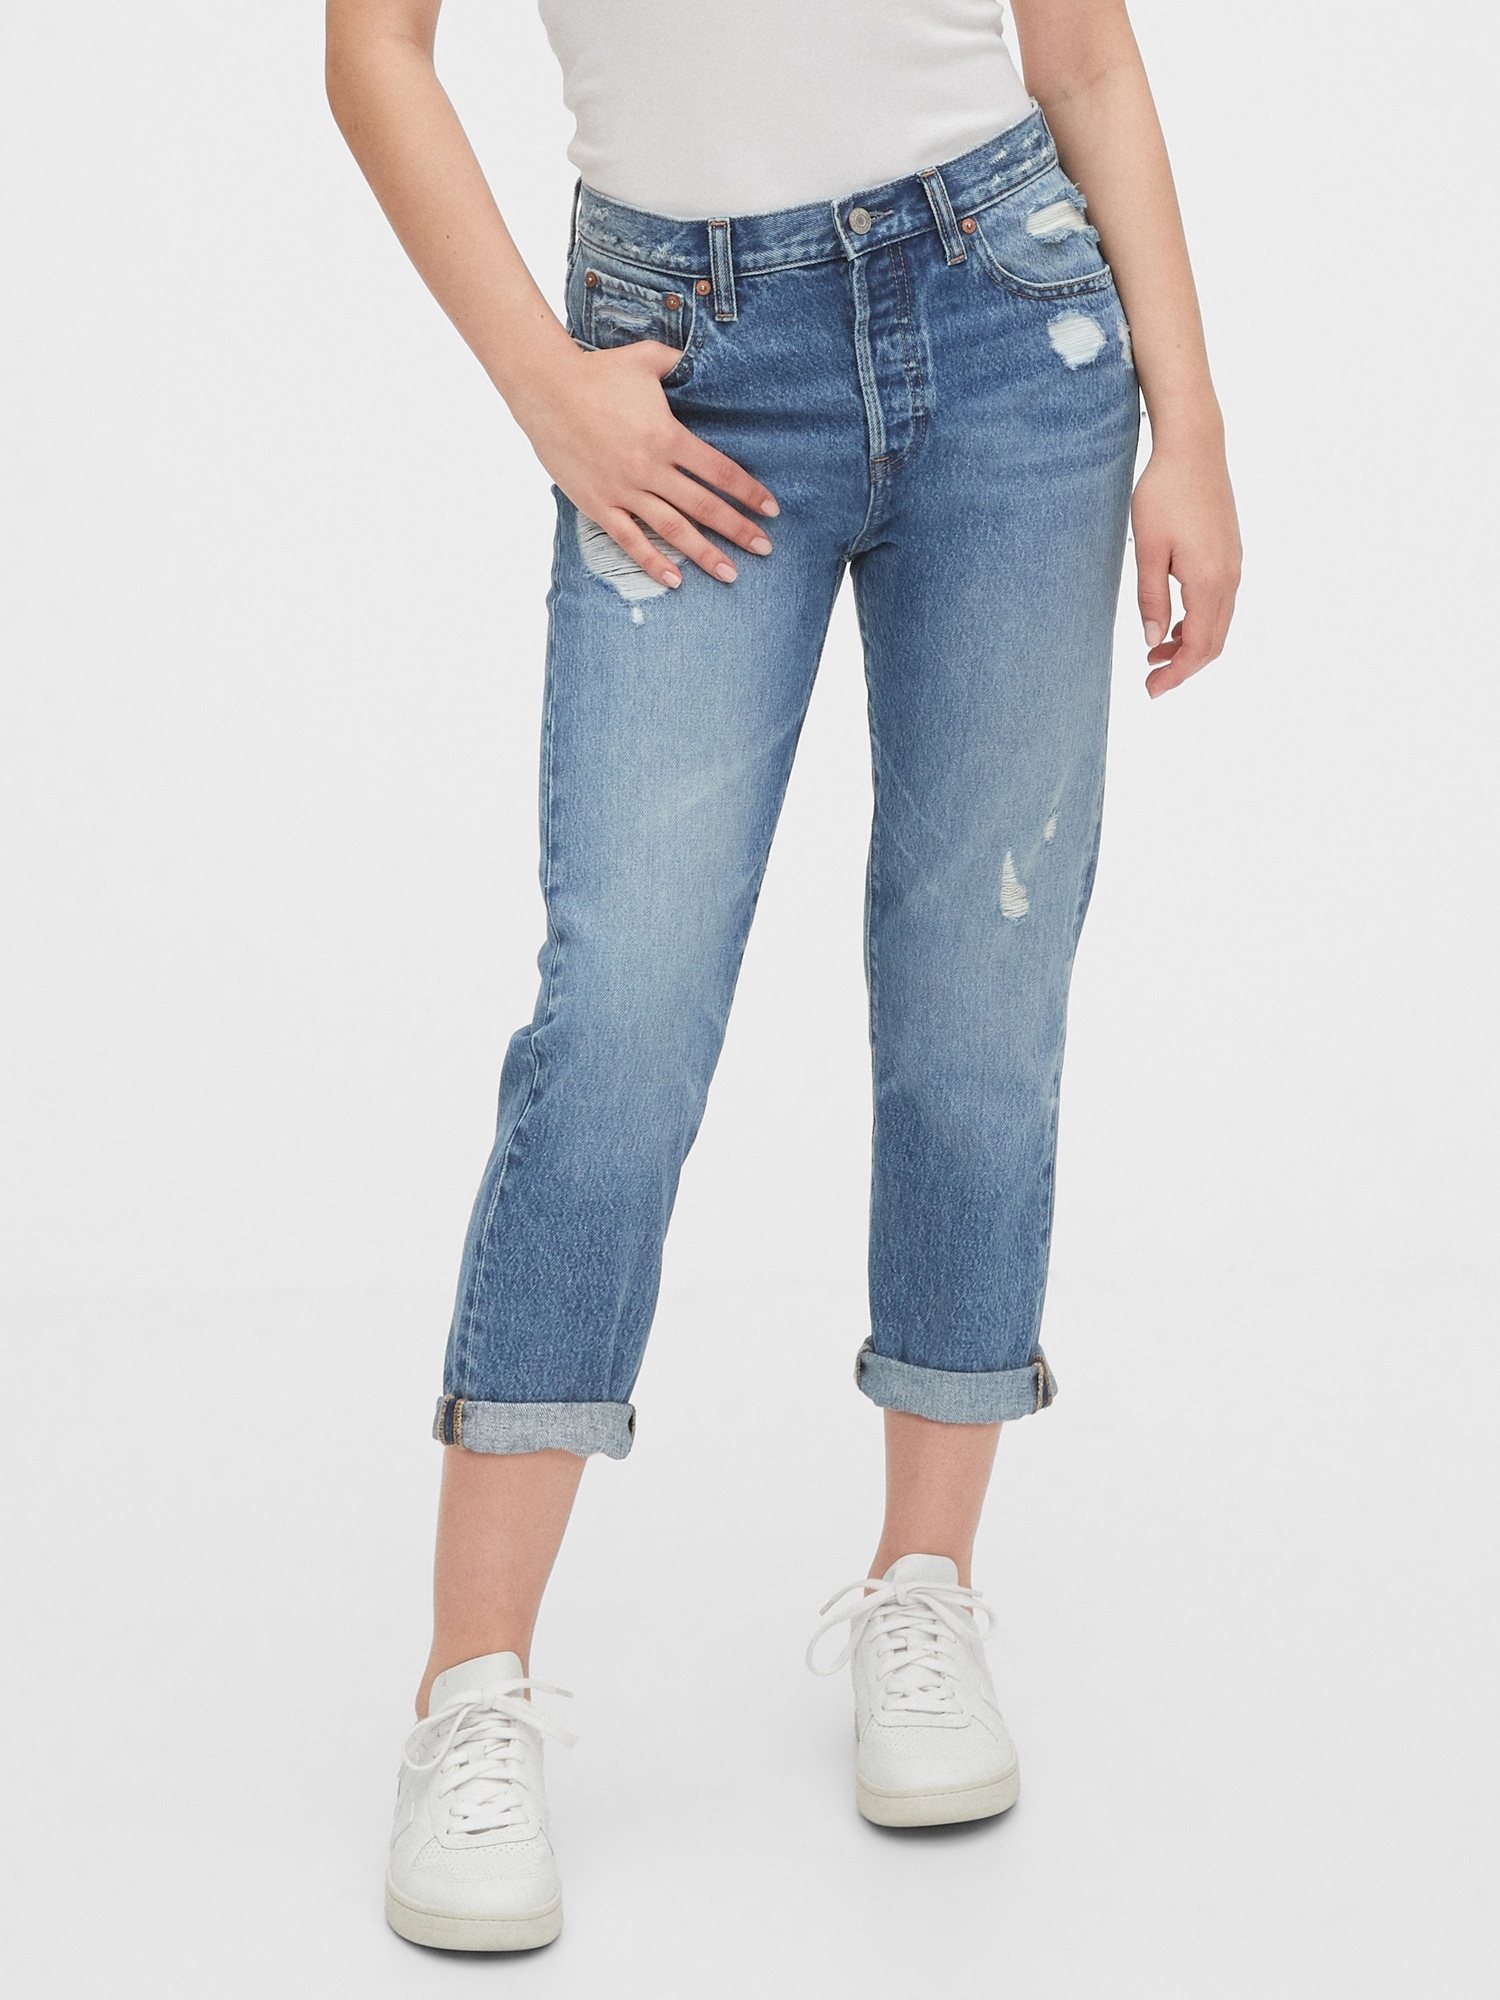 jeans from gap